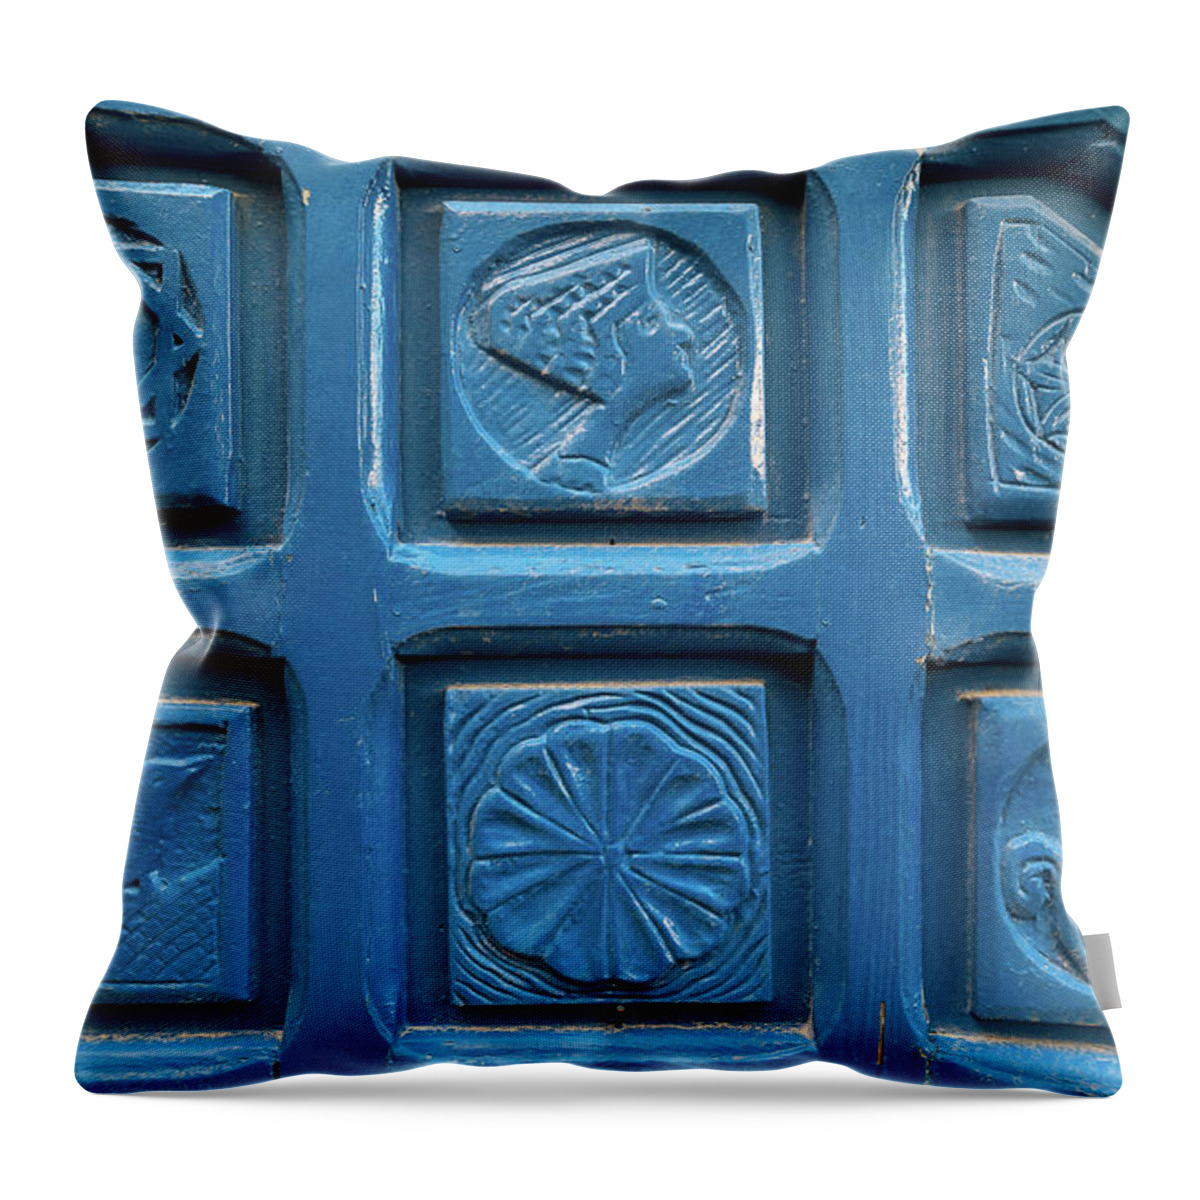 Photography Throw Pillow featuring the photograph Close-up Of Tiles, Jaffa, Tel Aviv #2 by Panoramic Images